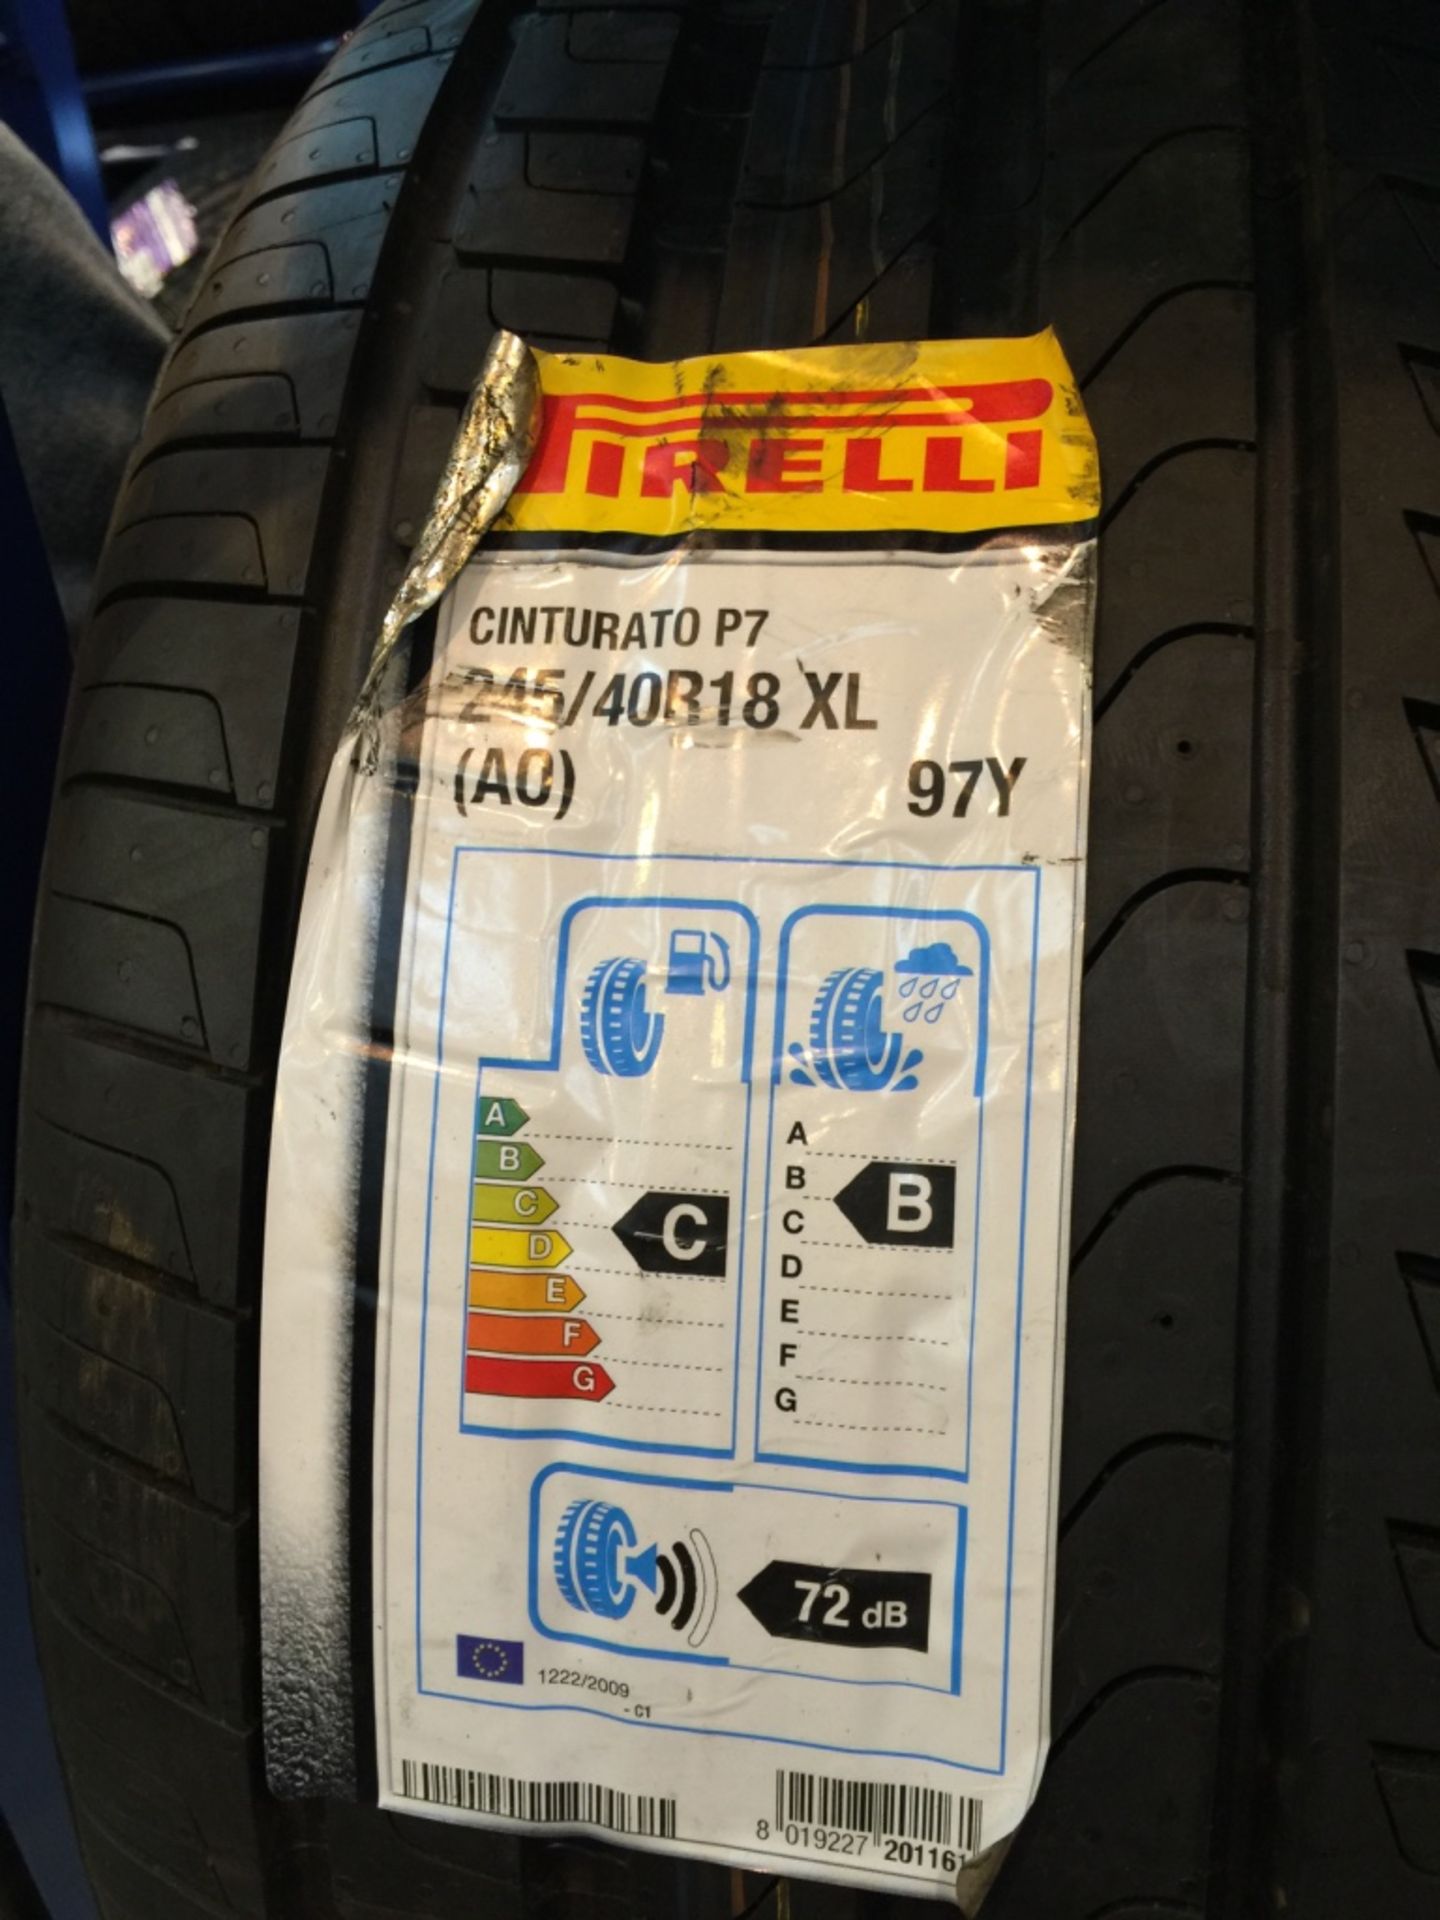 54: Pirelli Tyres Car & 4X4 - Many Large Sizes to include 18,19,21" Please see further Pictures ( - Image 36 of 55